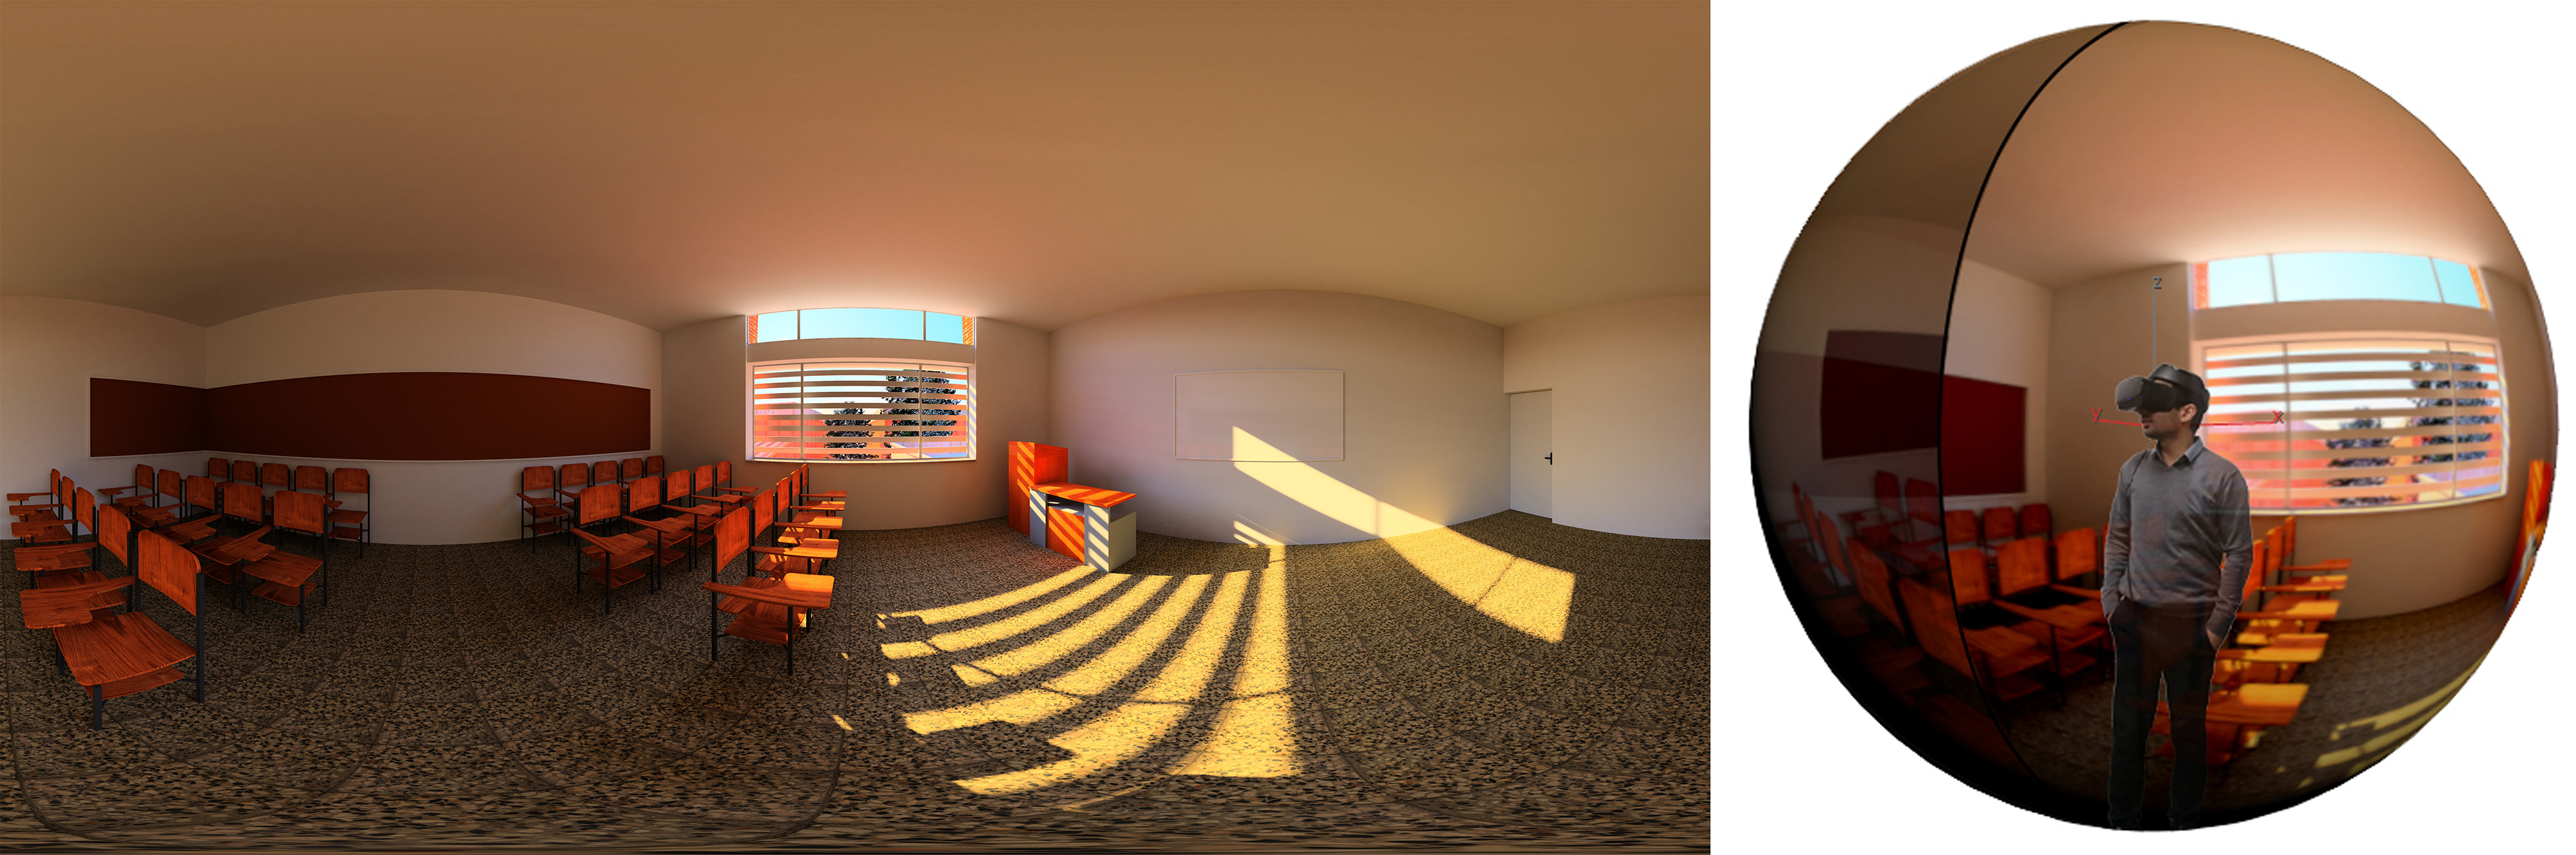 Equirectangular image applied as the sky background in the software Unity to create 360 immersive scene- model No.2.